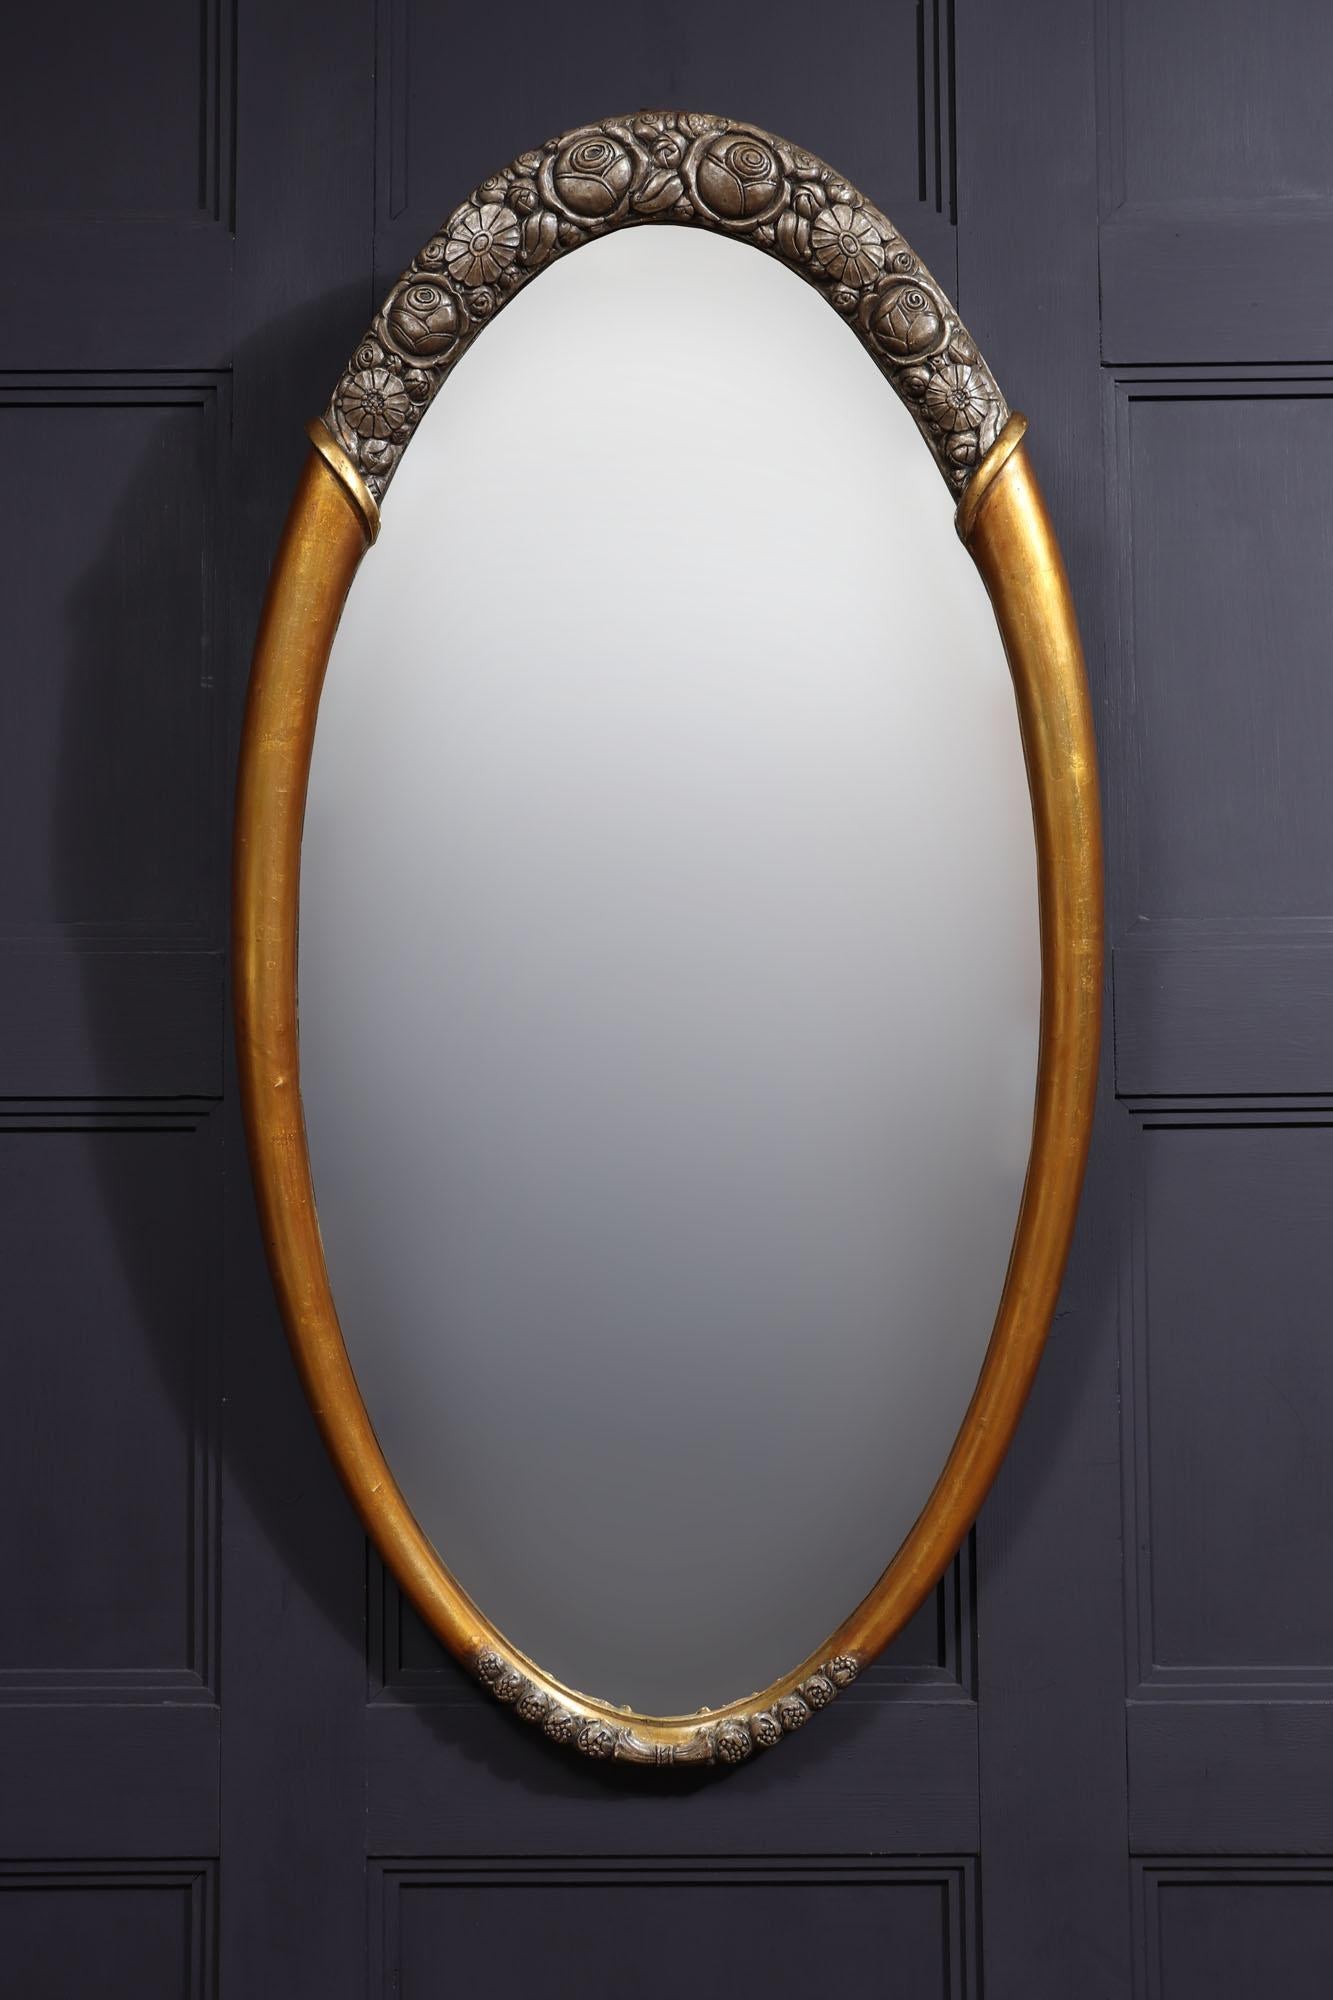 Art Deco Parcel Gilt Oval Mirror By Sue et Mare 1925 In Good Condition For Sale In Paddock Wood Tonbridge, GB